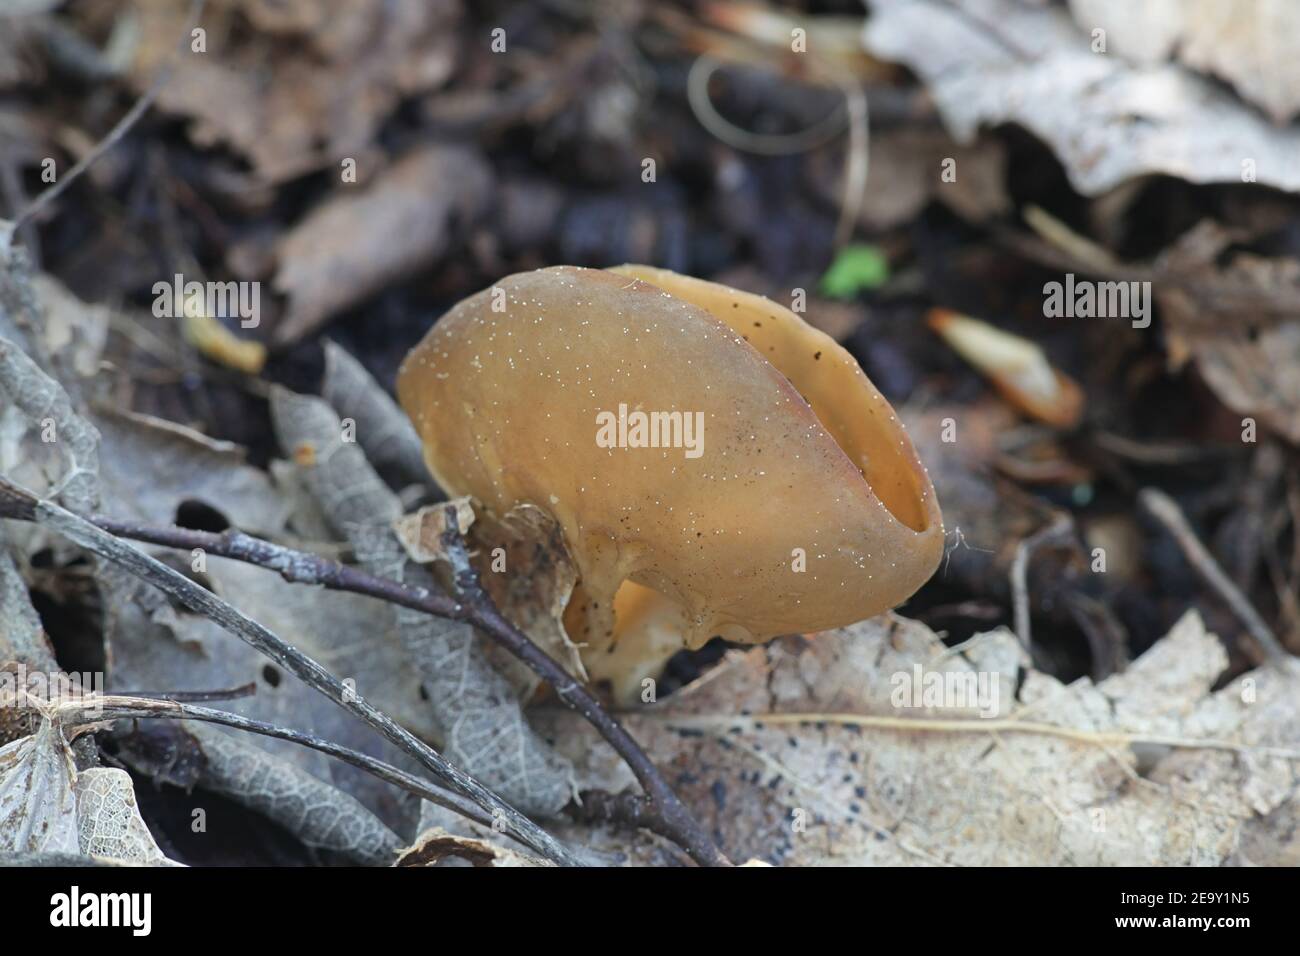 Helvella acetabulum, known as cabbage leaf Helvella, vinegar cup or the brown ribbed elfin cup, wild fungus from Finland Stock Photo